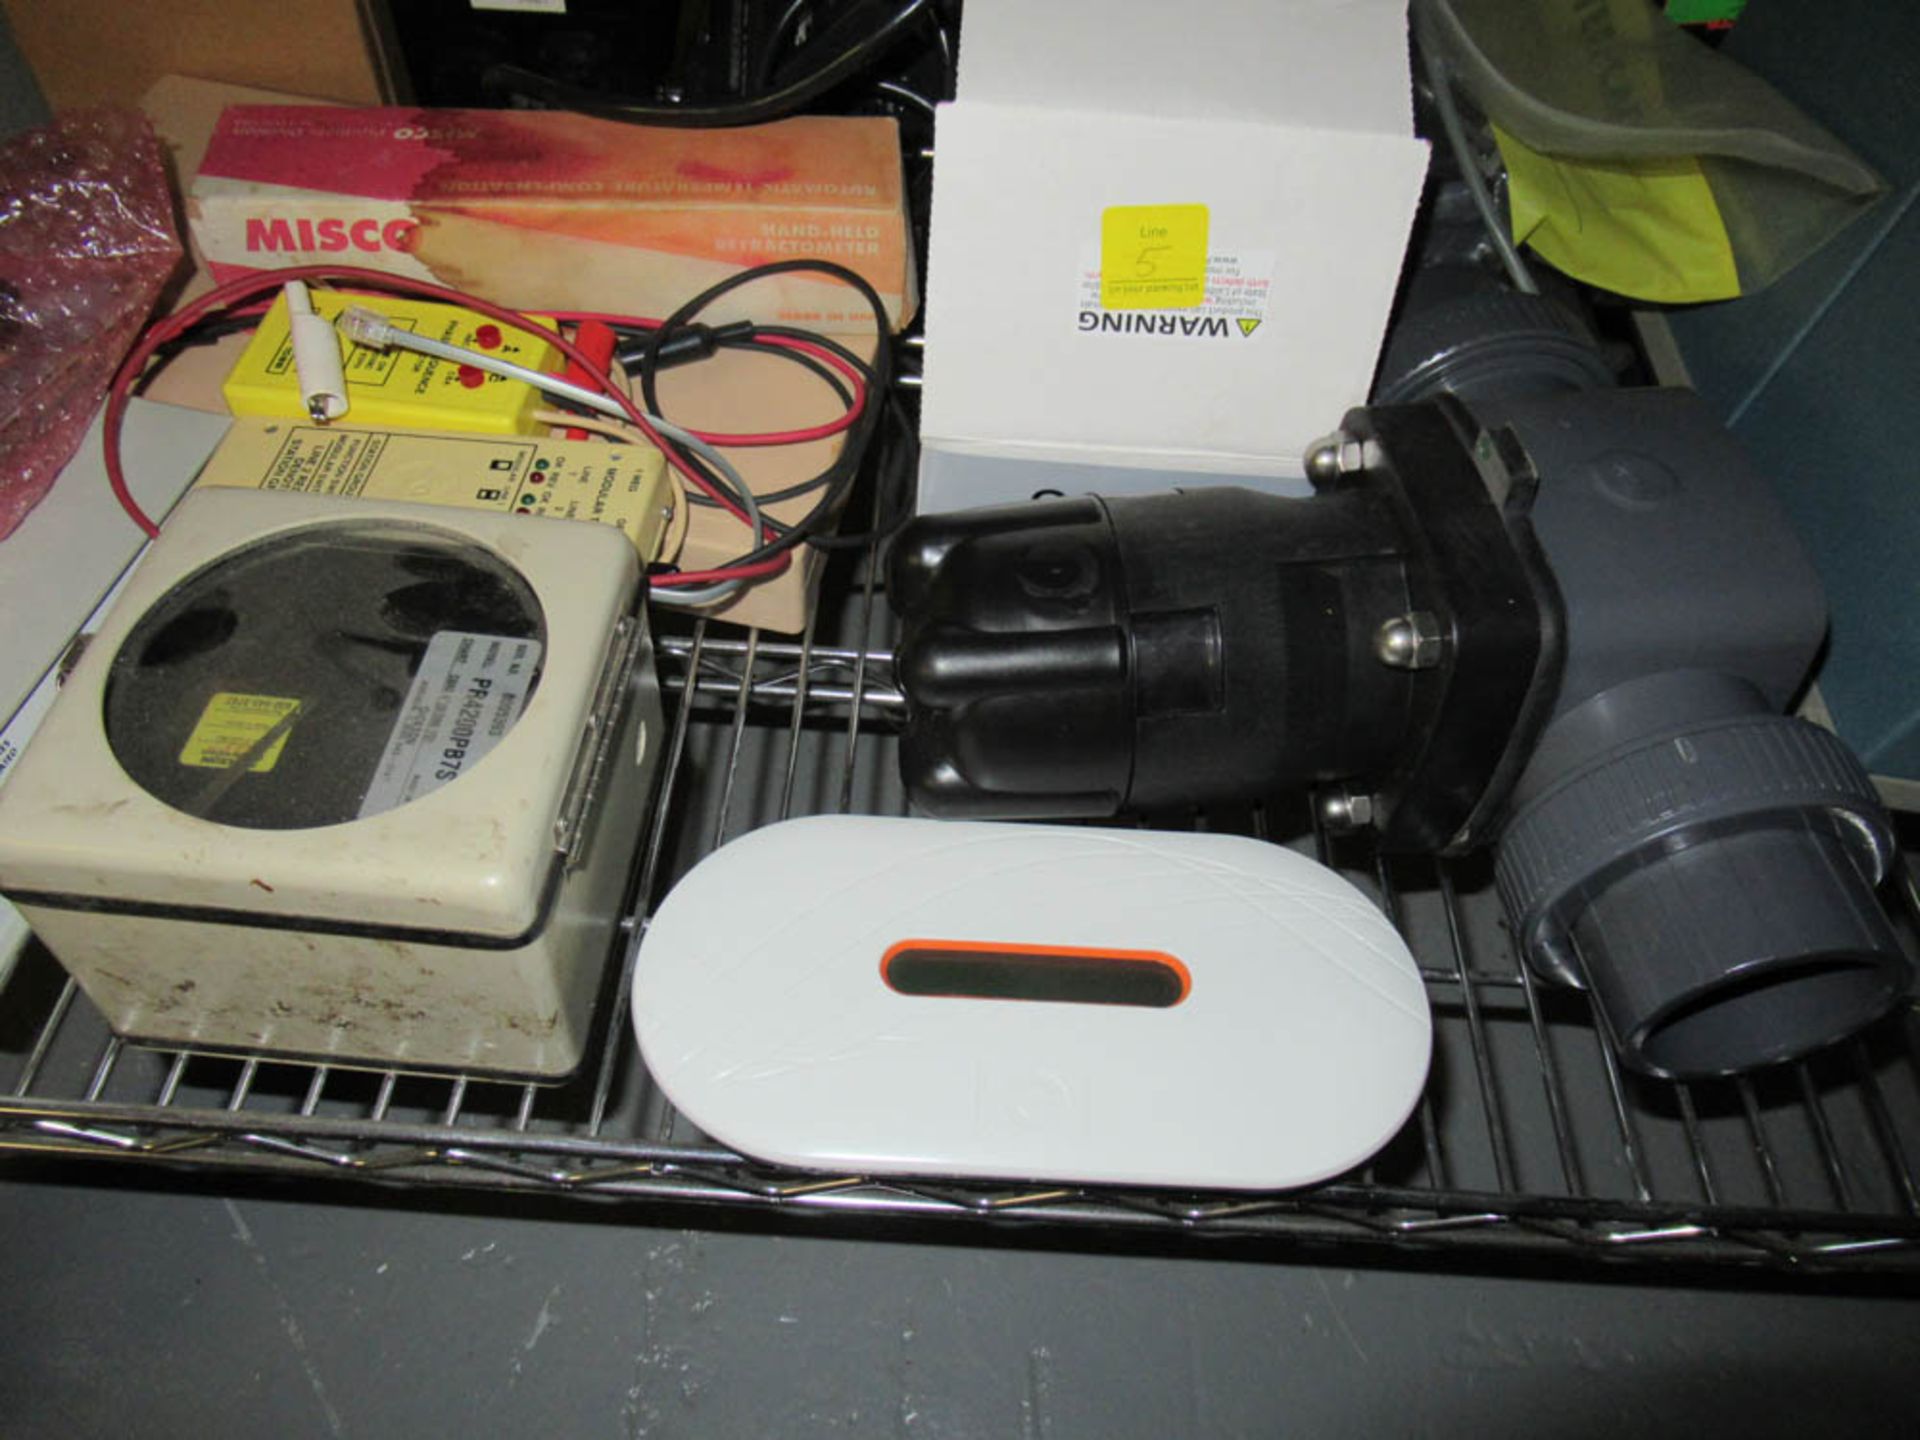 ASSORTED TEST ITEMS & INSPECTION, CART - SEE PHOTO - Image 10 of 11